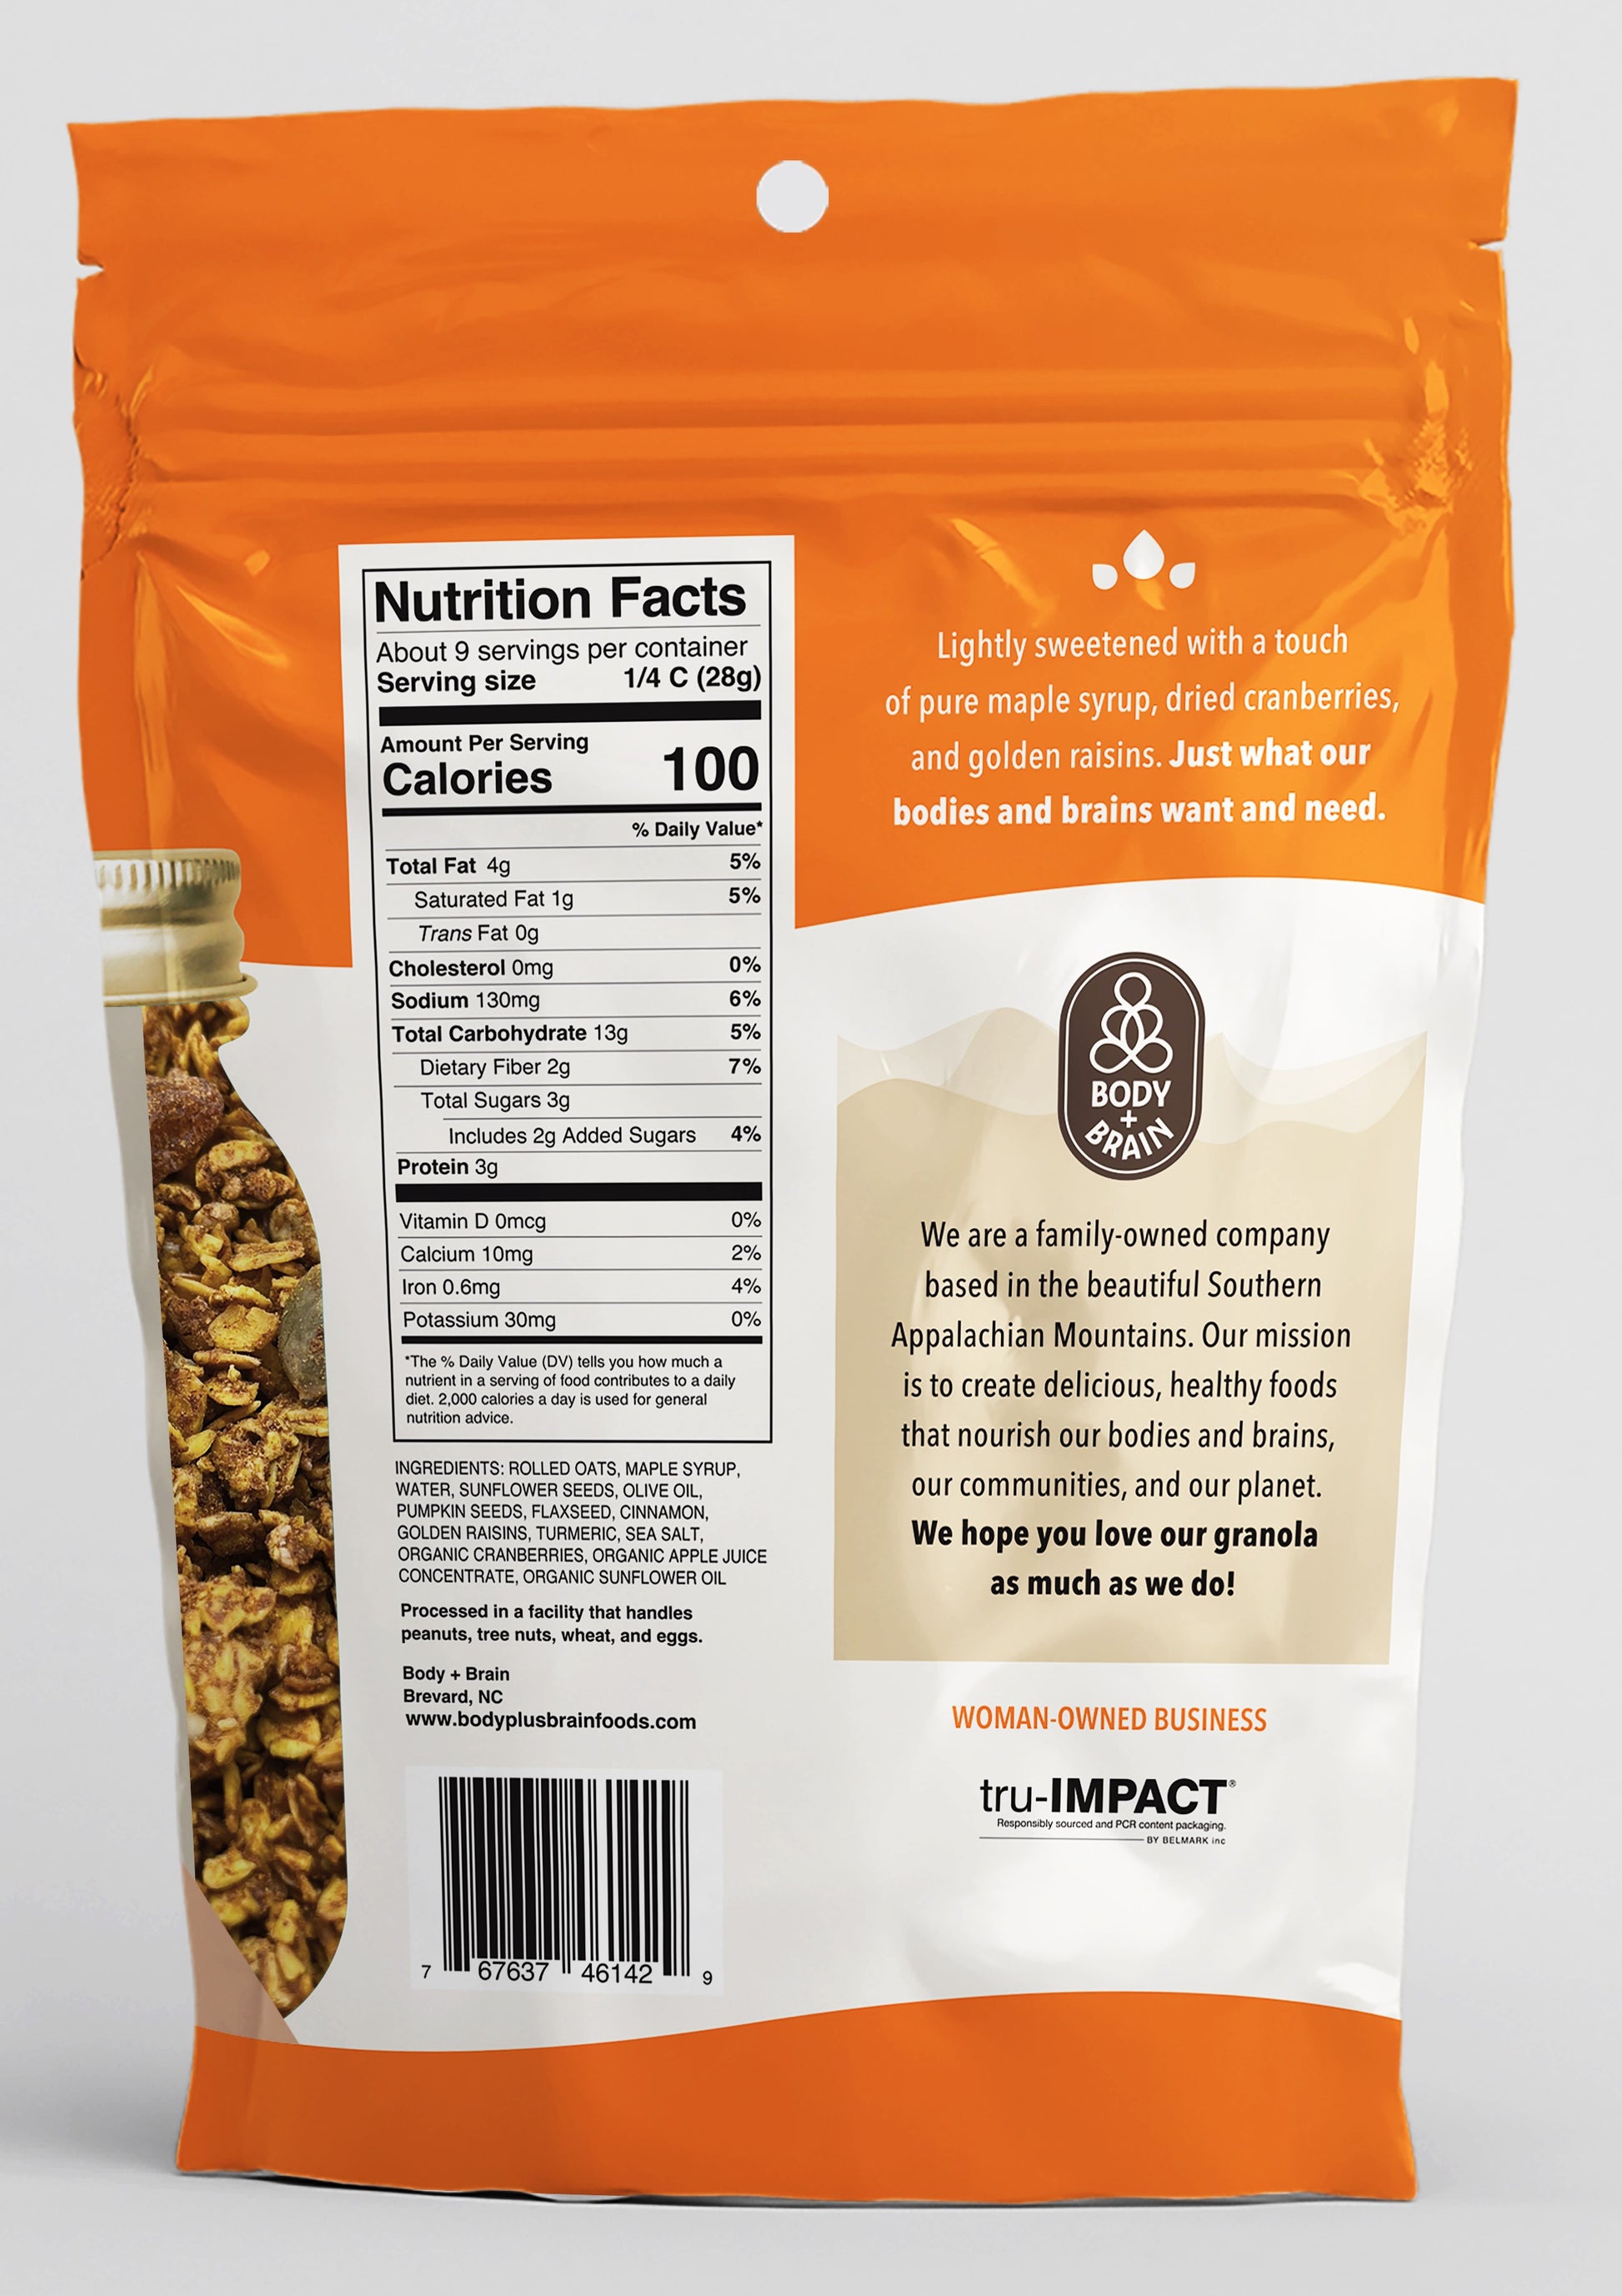 Body + Brain Golden Granola Ingredients and Nutrition Facts